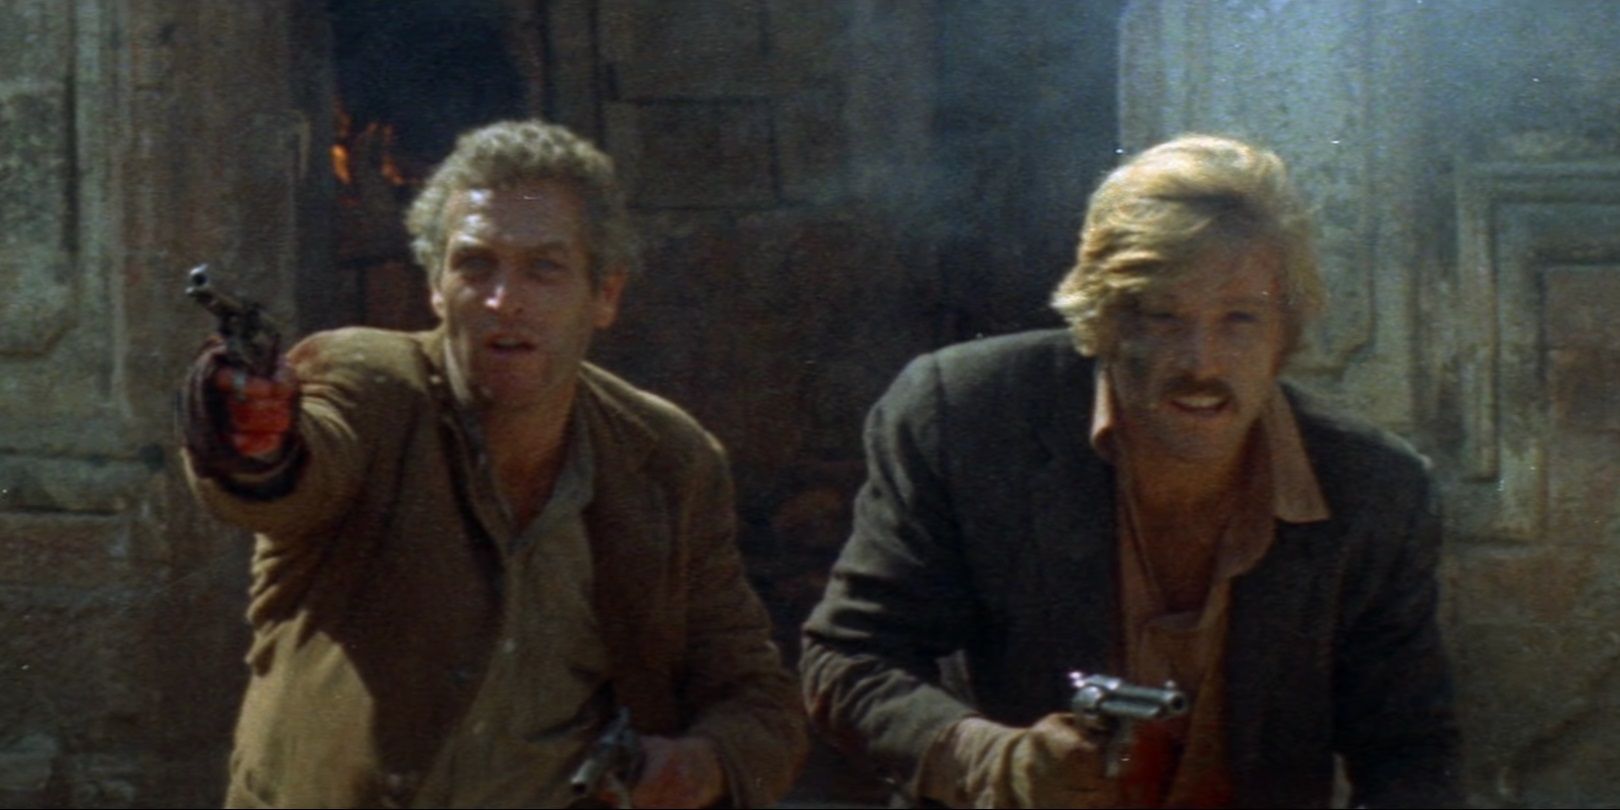 The final shot of Butch Cassidy and the Sundance Kid